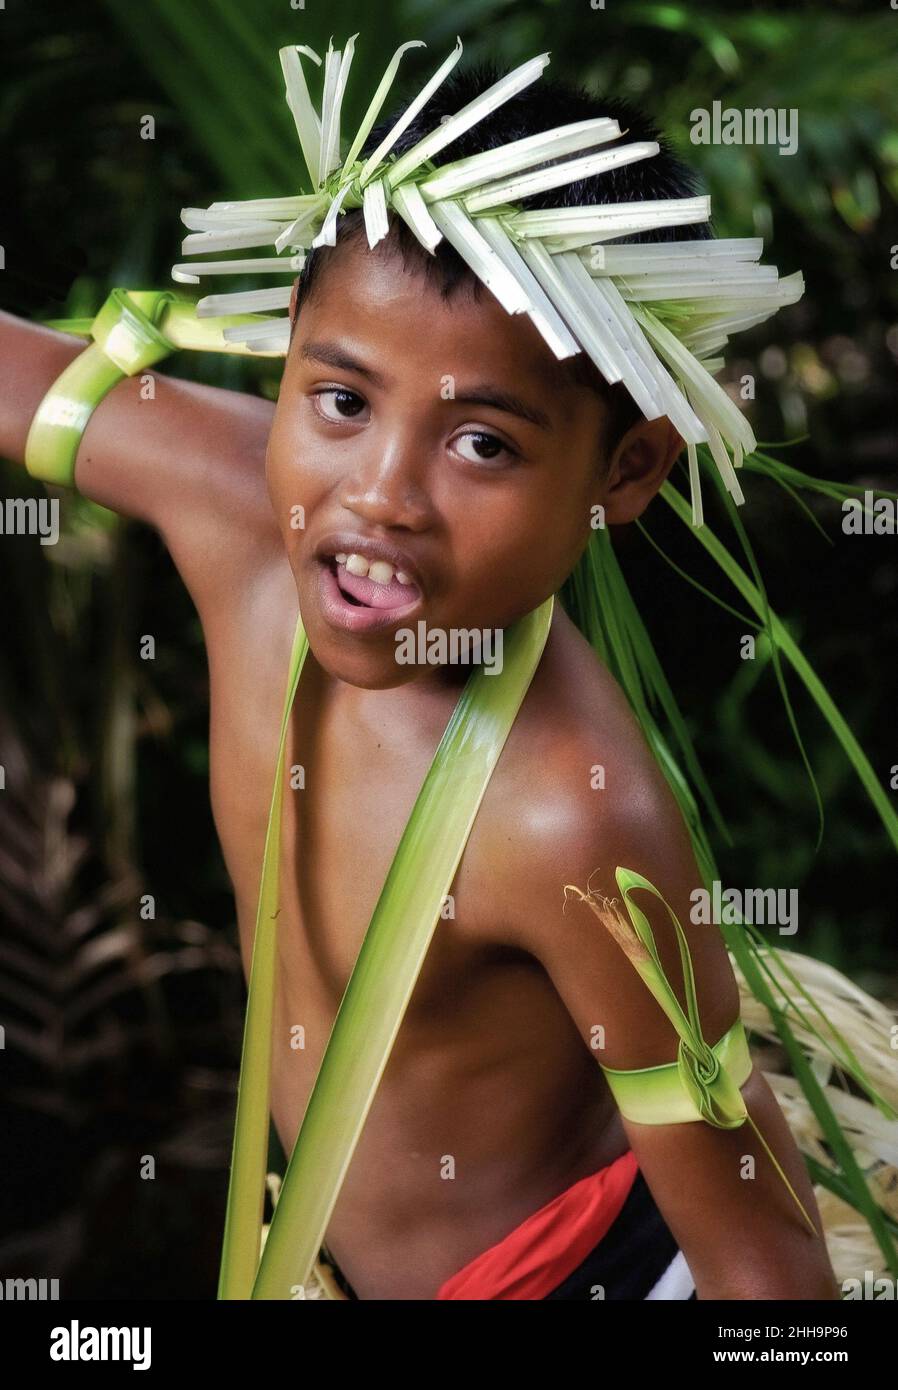 A Young traditional dancer on the the Island of Yap, an island located in the Caroline Islands of the western Pacific Ocean, a part of the Federated S Stock Photo